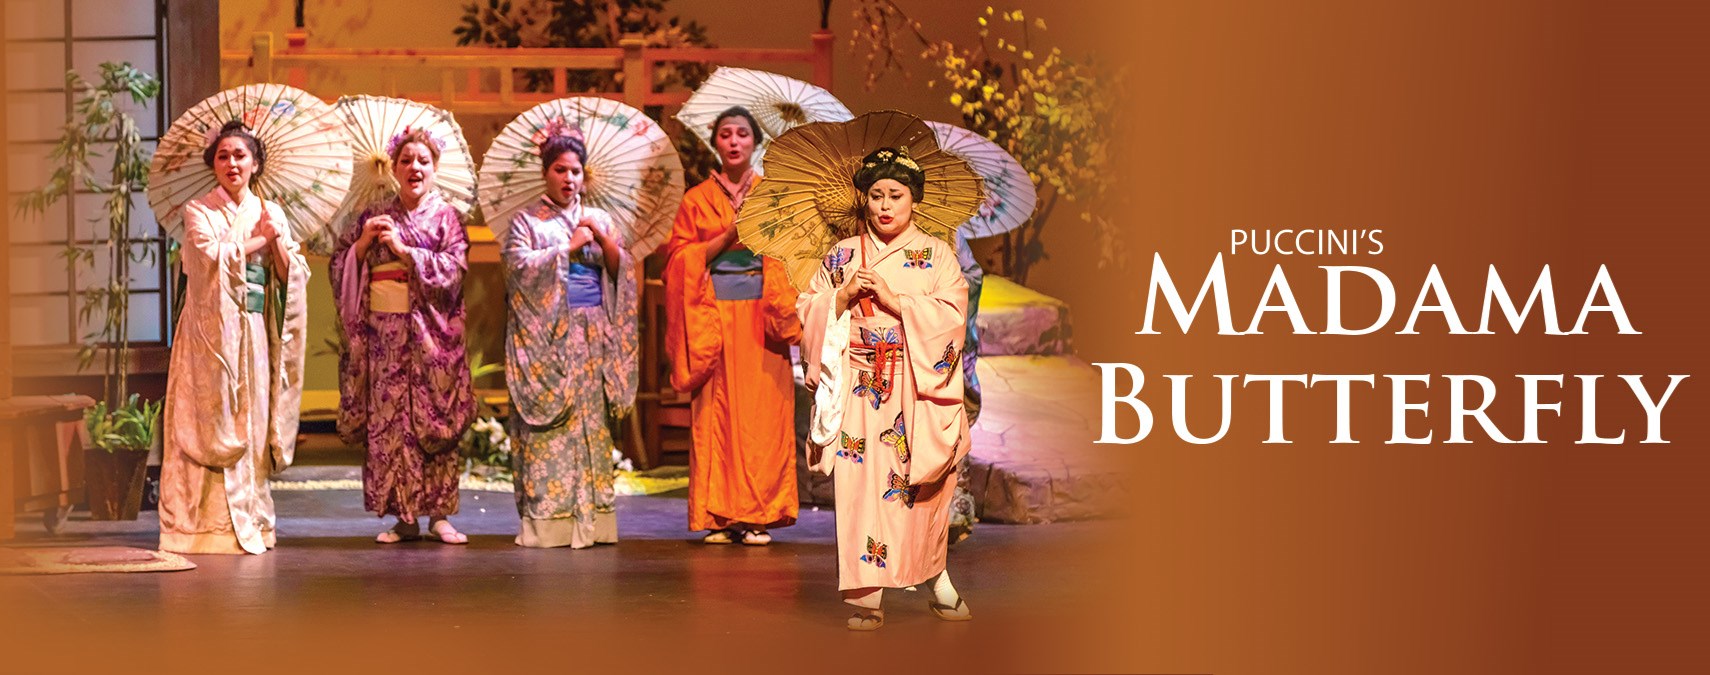 Madama Butterfly -February 1, 2023 at 7:30pm